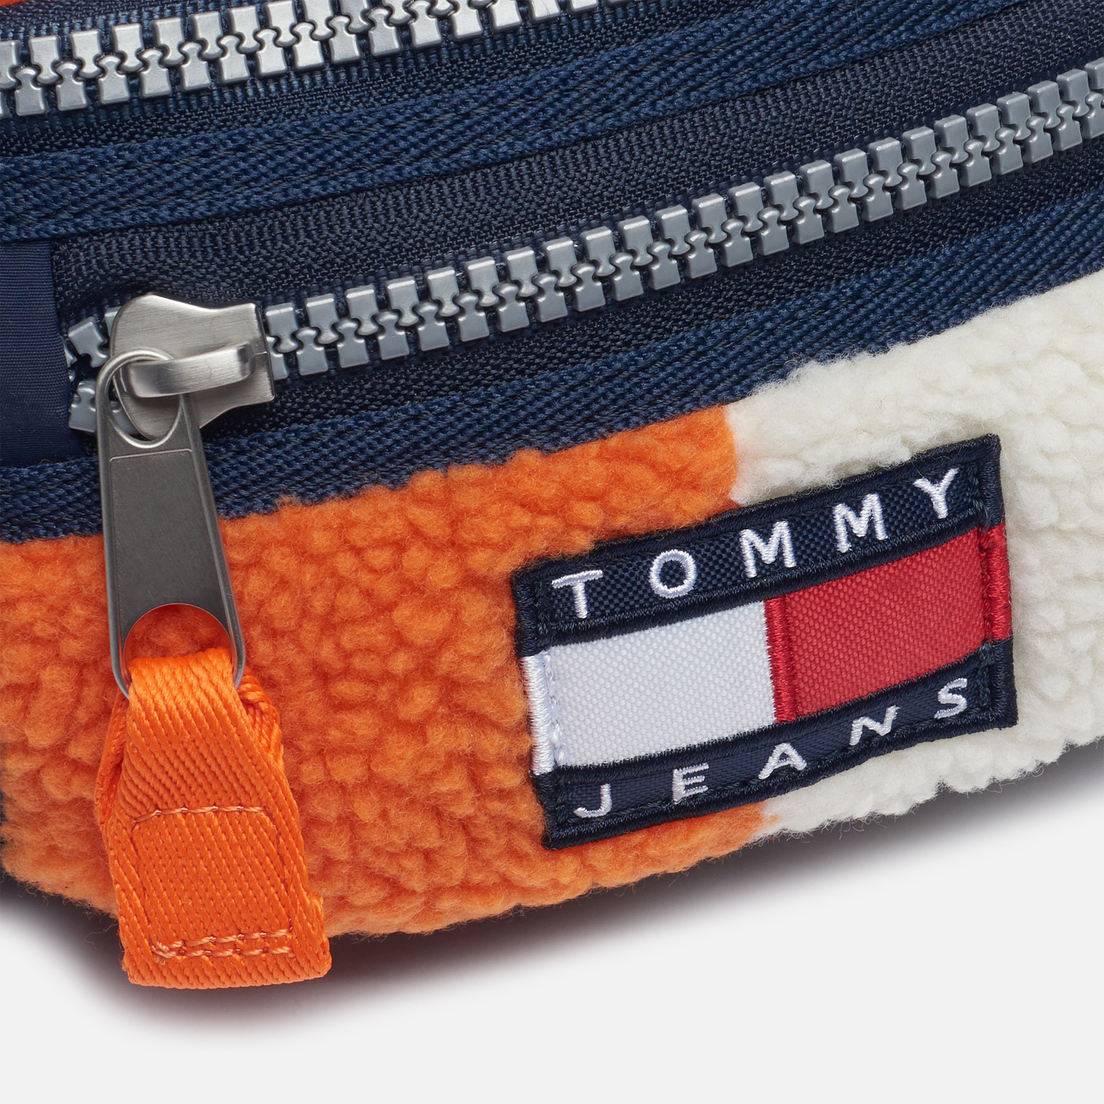 Tommy Jeans Сумка на пояс Heritage Colorblock Sherpa Bumbag